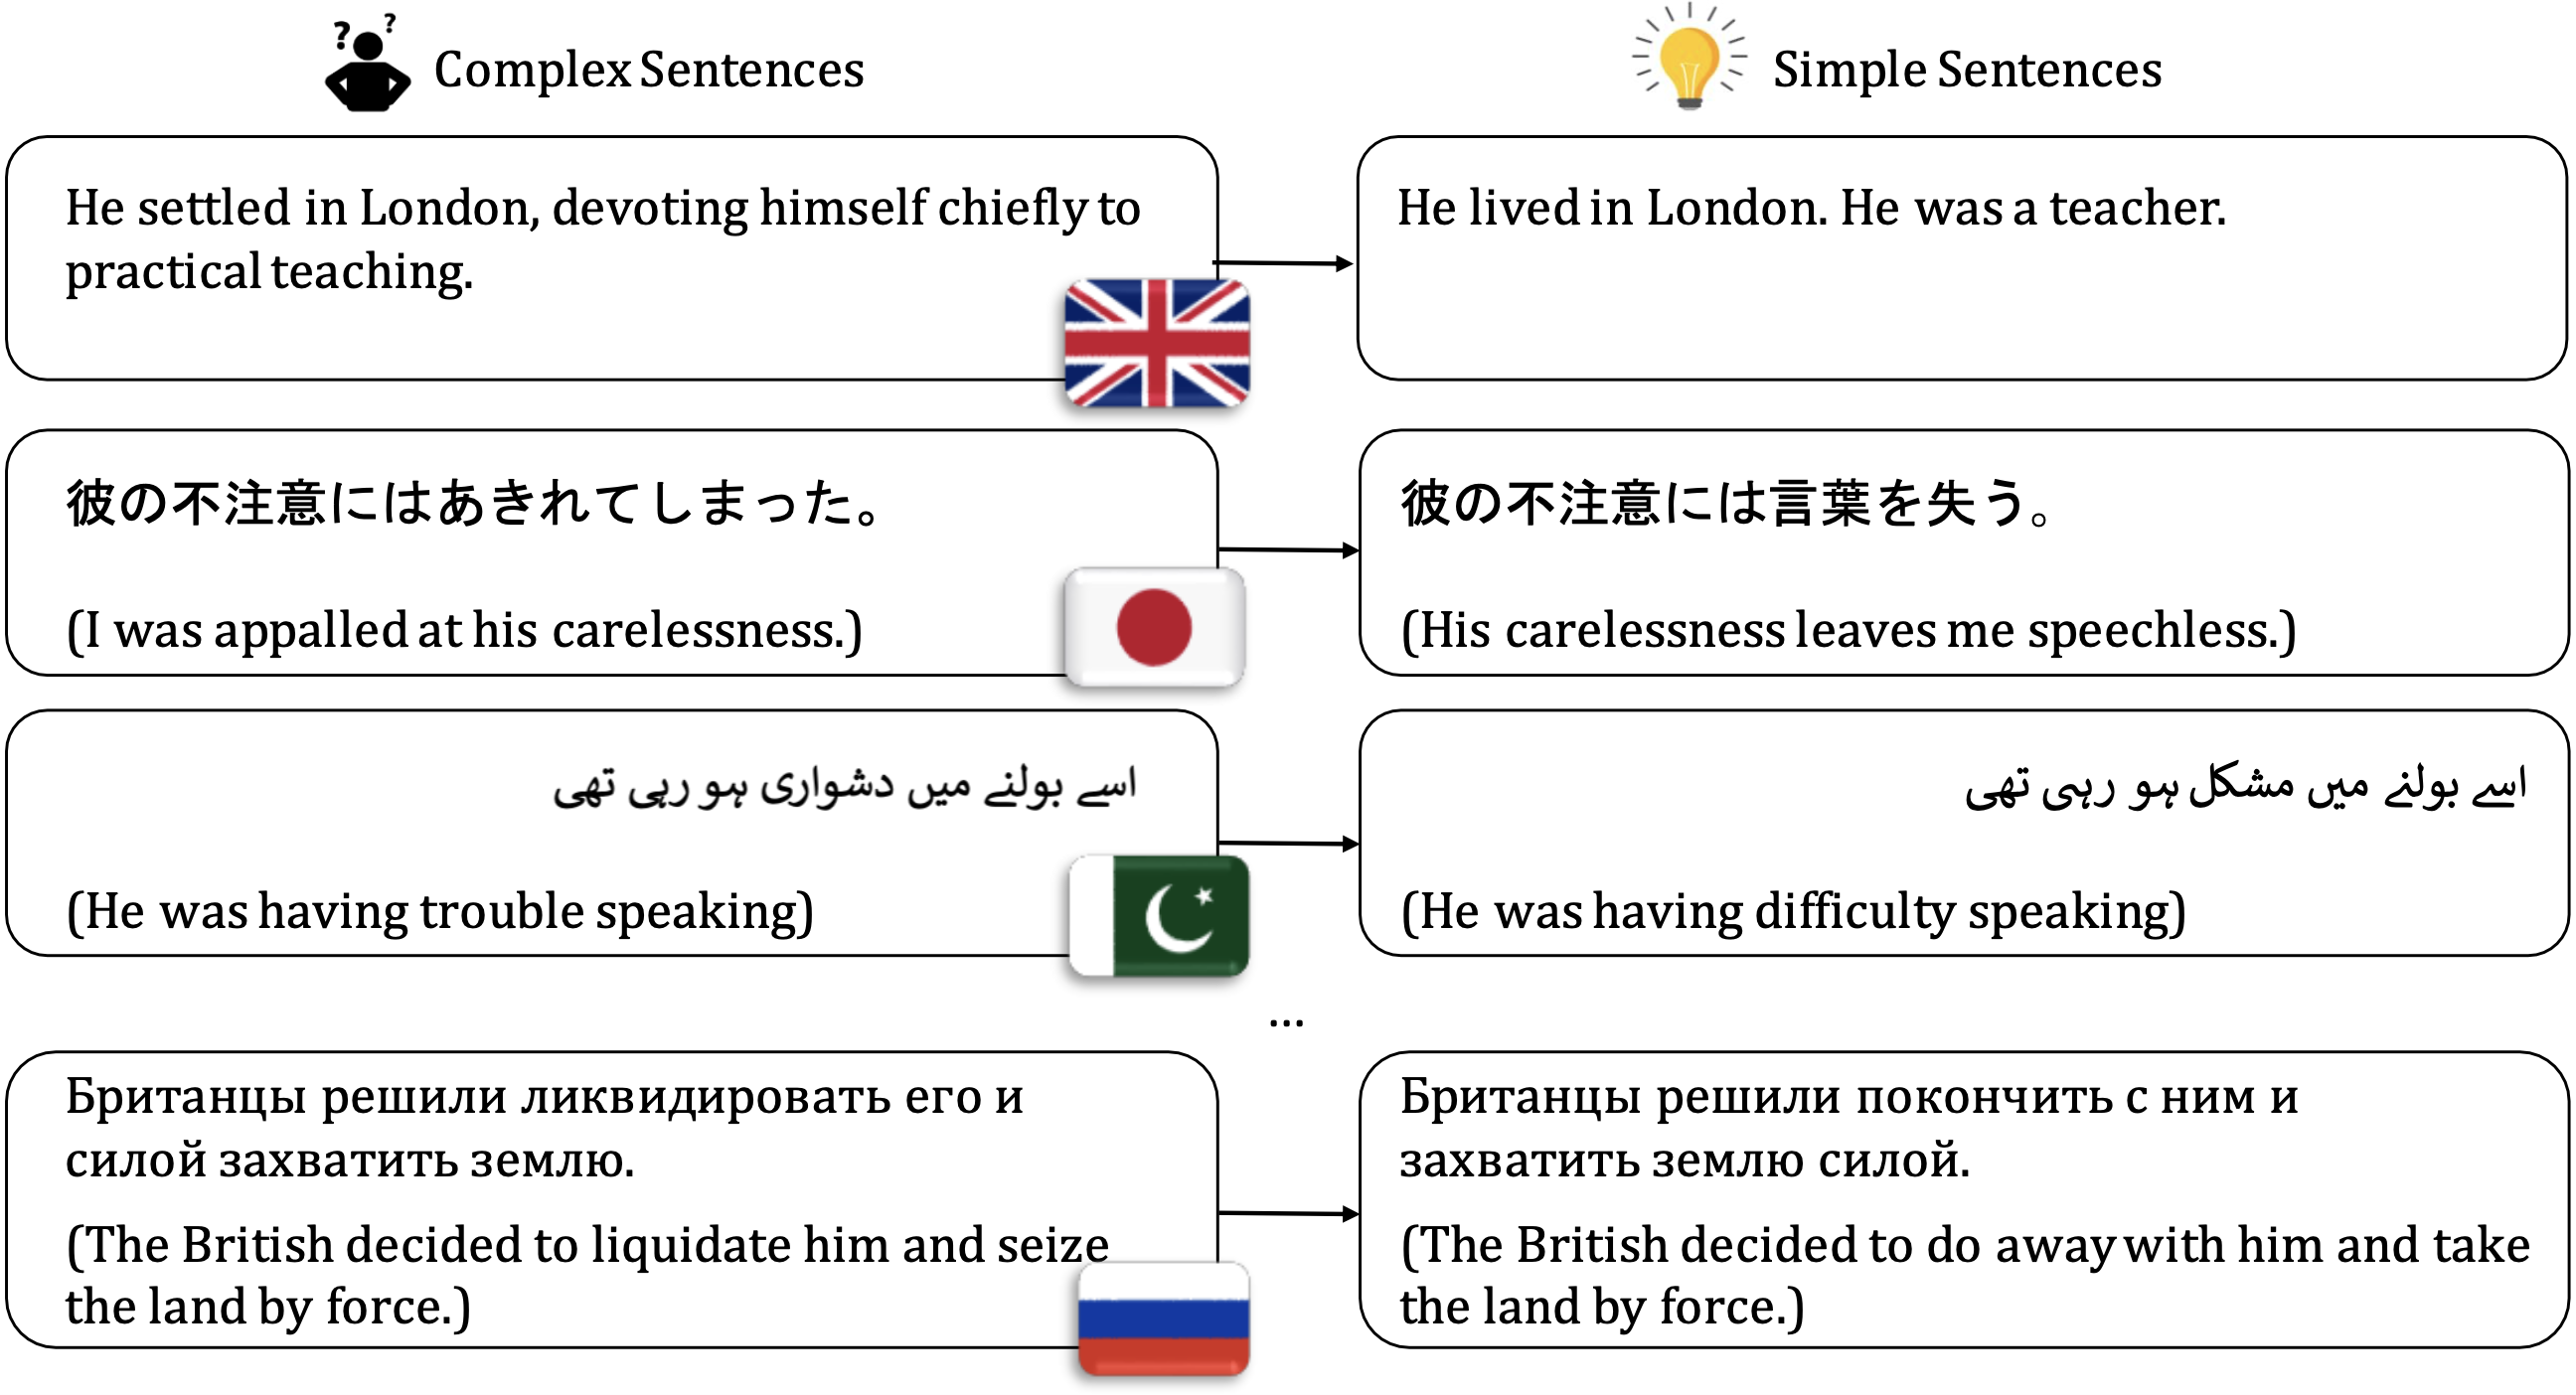 Figure showing four complex and simple sentence pairs.  One pair in English, one in Japanese, one in Urdu, and one in Russian.  The English complex sentence reads "He settled in London, devoting himself chiefly to practical teaching." which is paired with the simple sentence "He lived in London. He was a teacher."